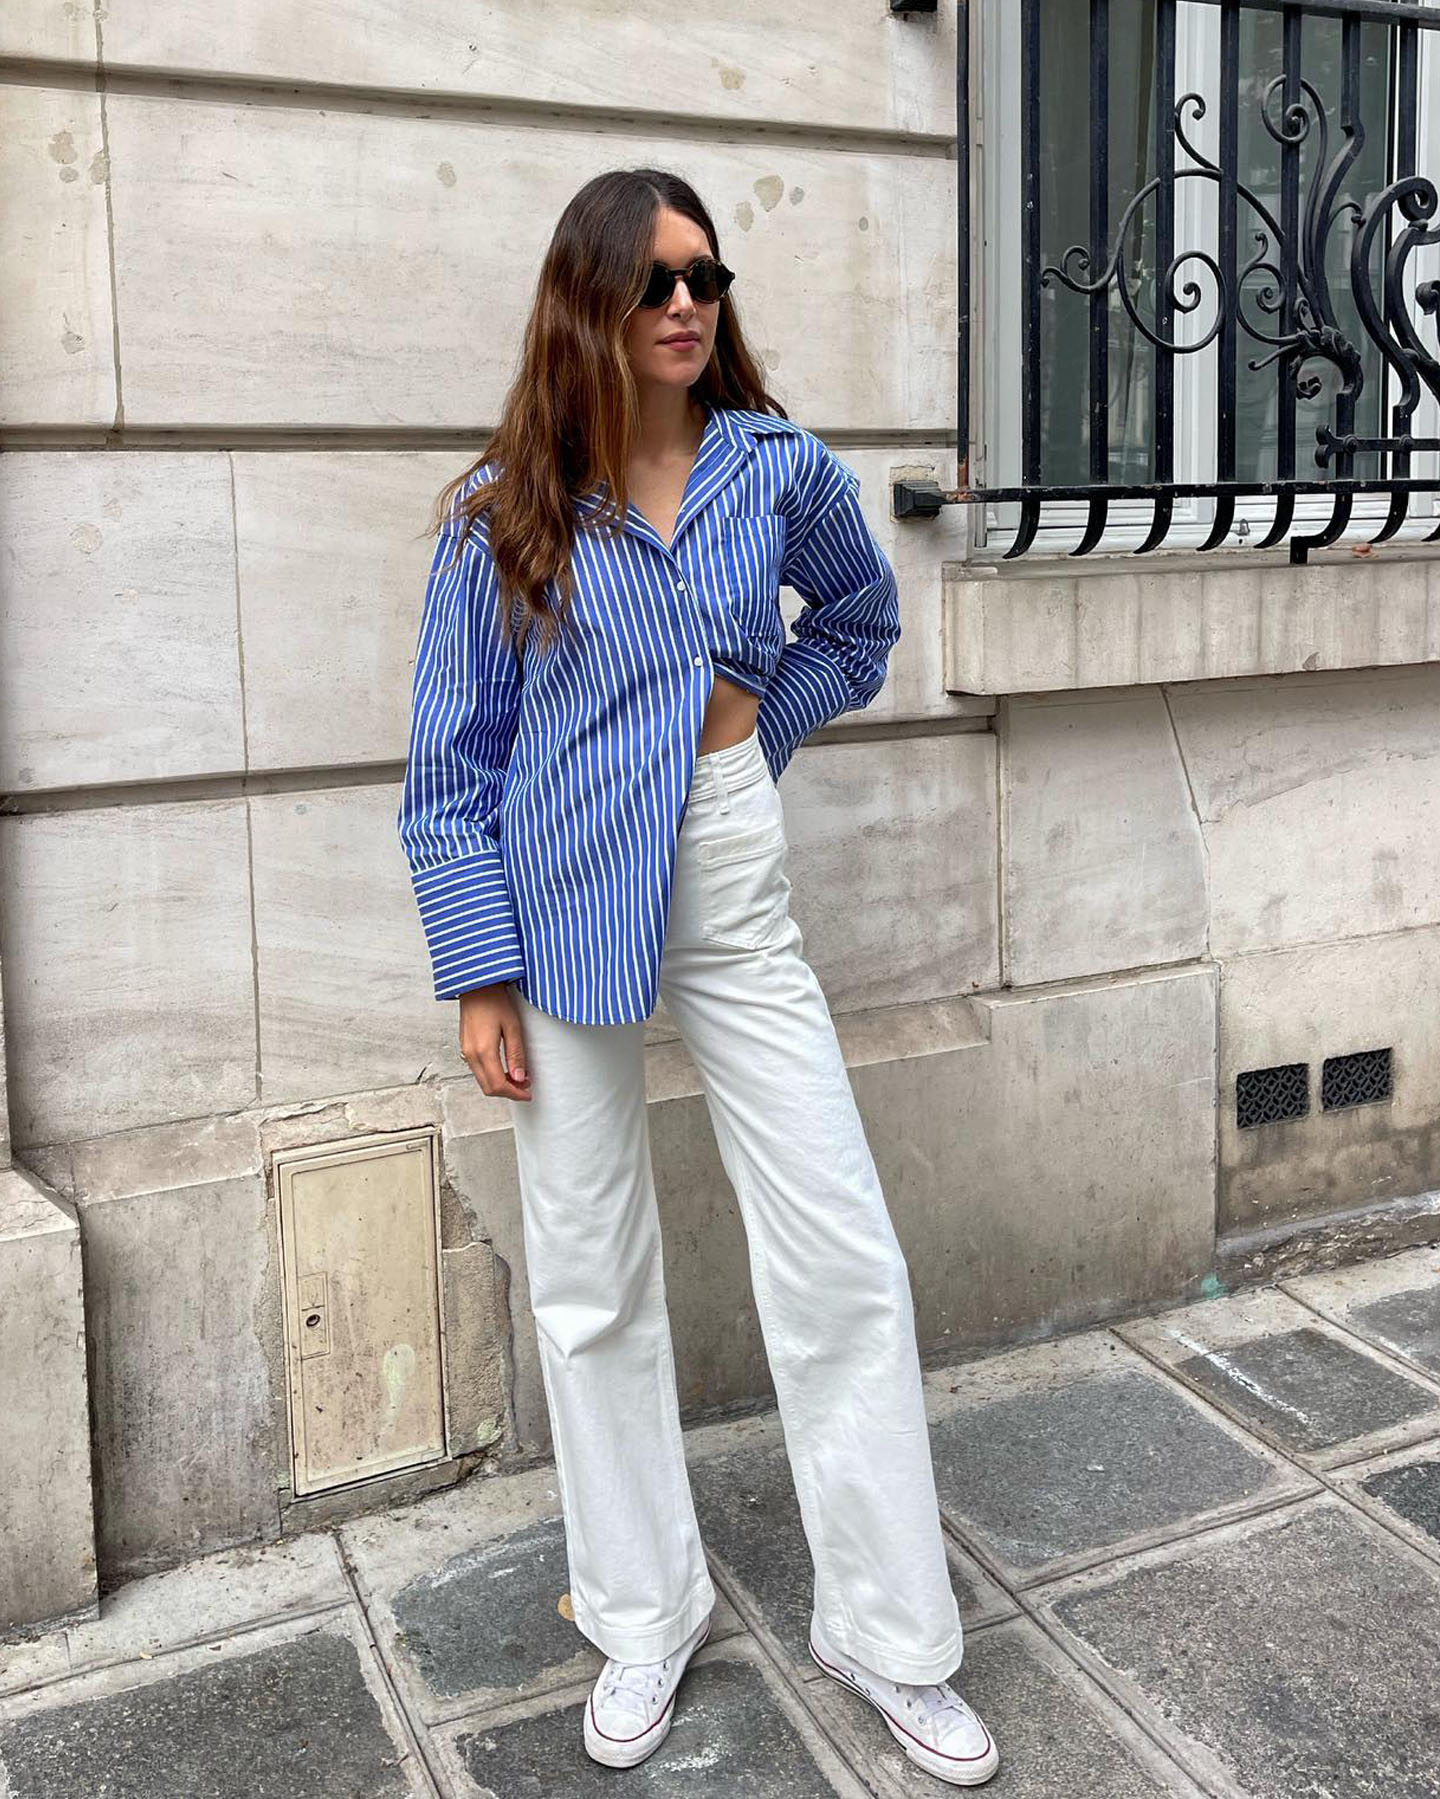 a stylish woman poses on a street in Paris wearing round sunglasses, a casual outfit with a striped blue button-down shirt, white wide-leg jeans, and white Converse sneakers